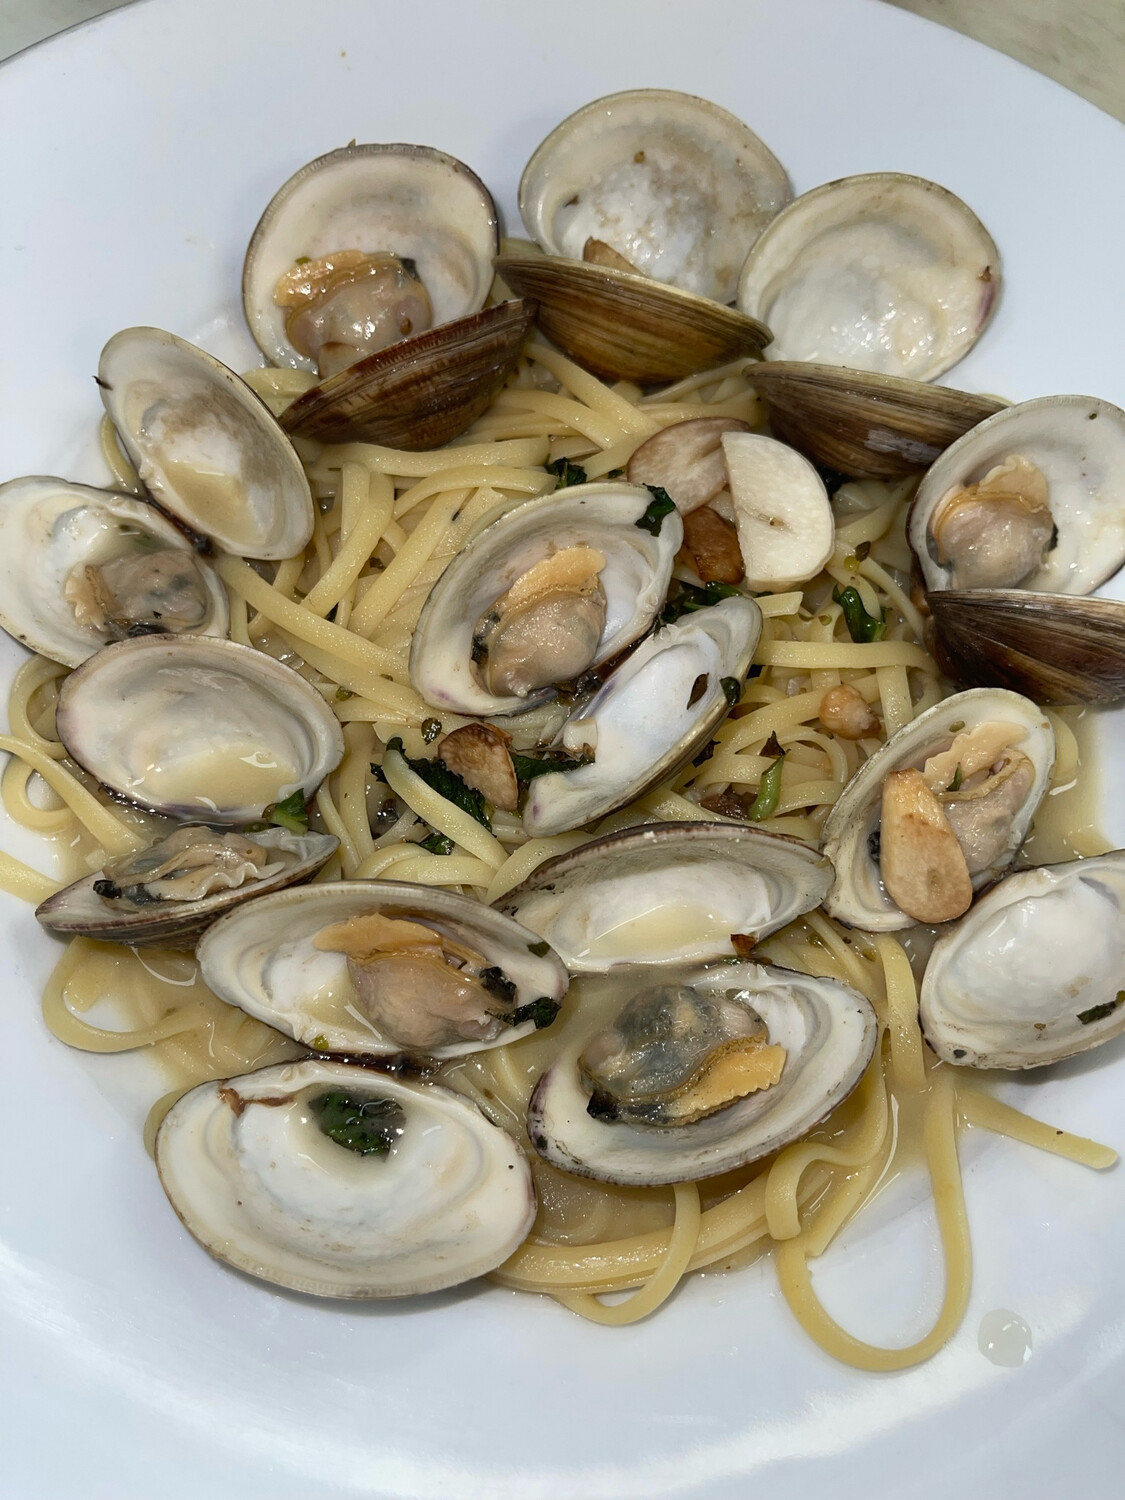 ​
Linguine with Clams